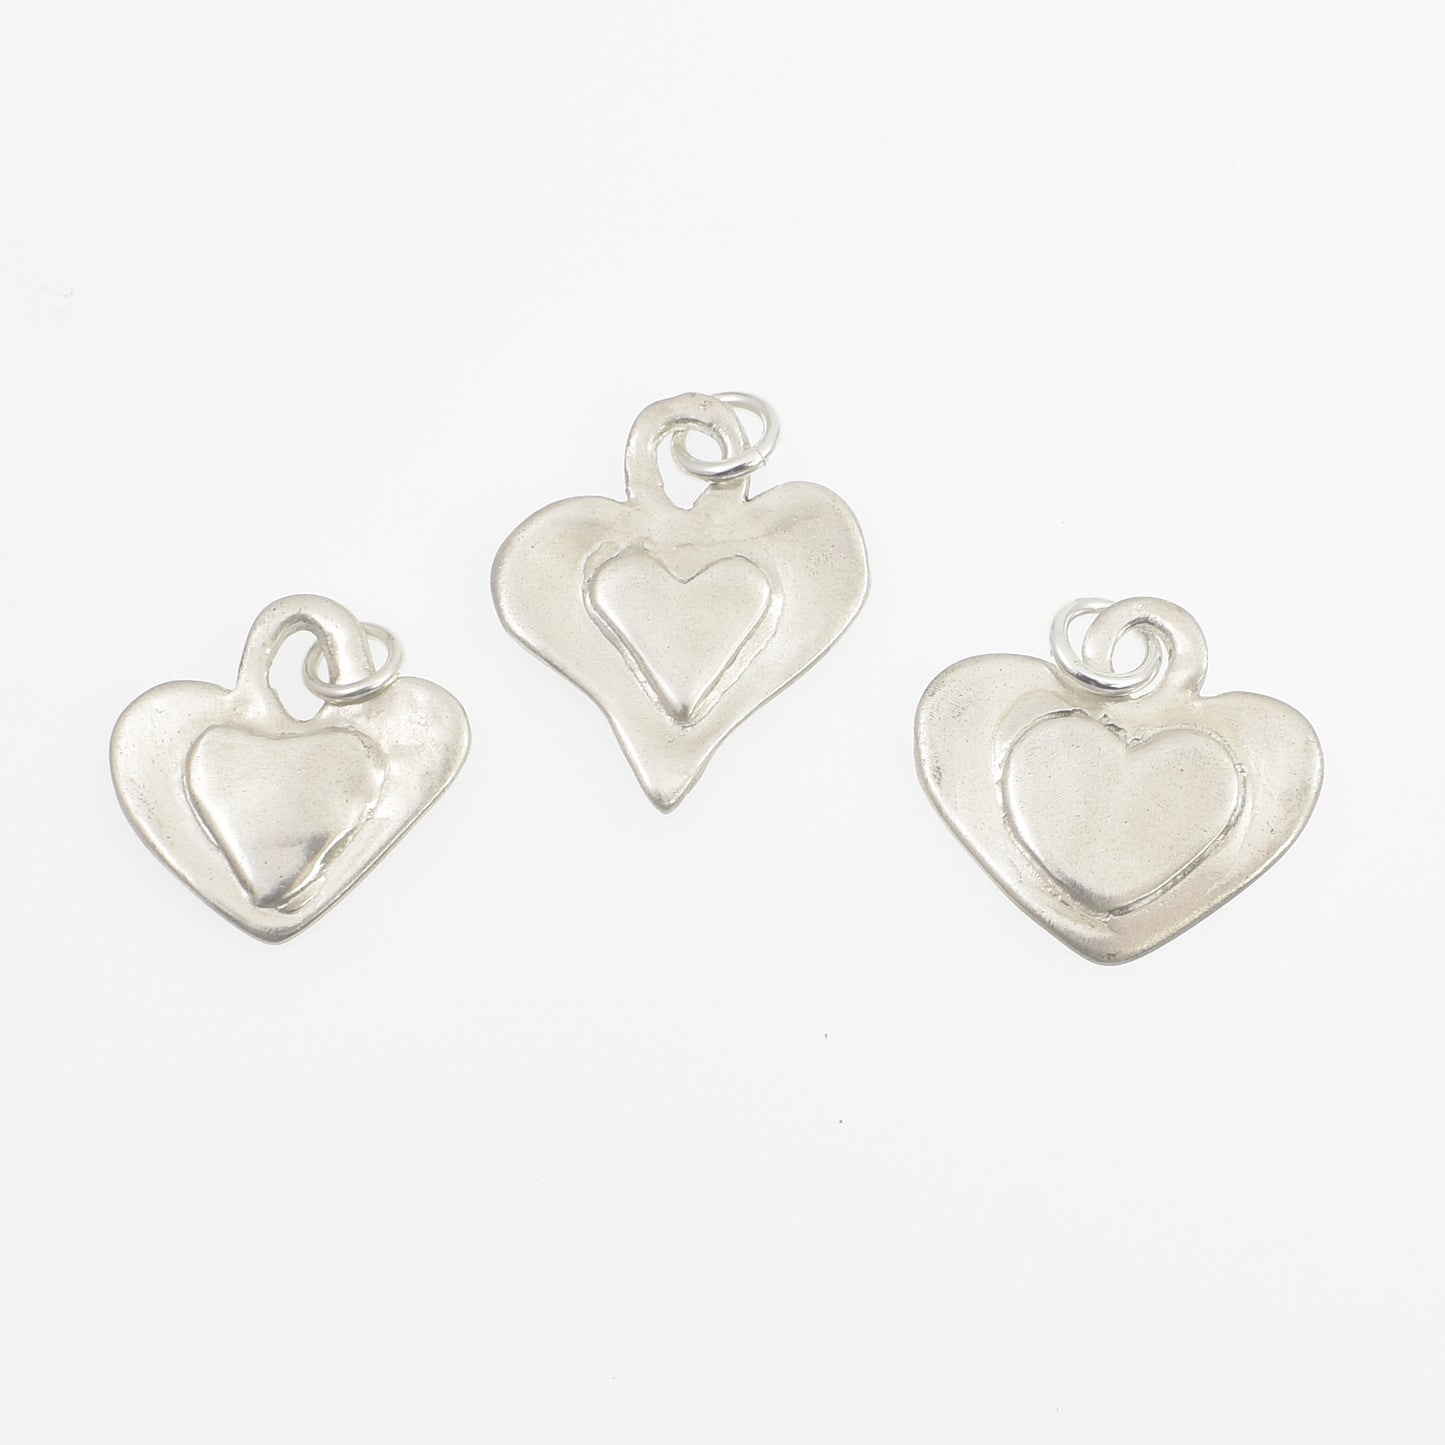 Sterling Silver Heart on Heart Charms All 3 Designs